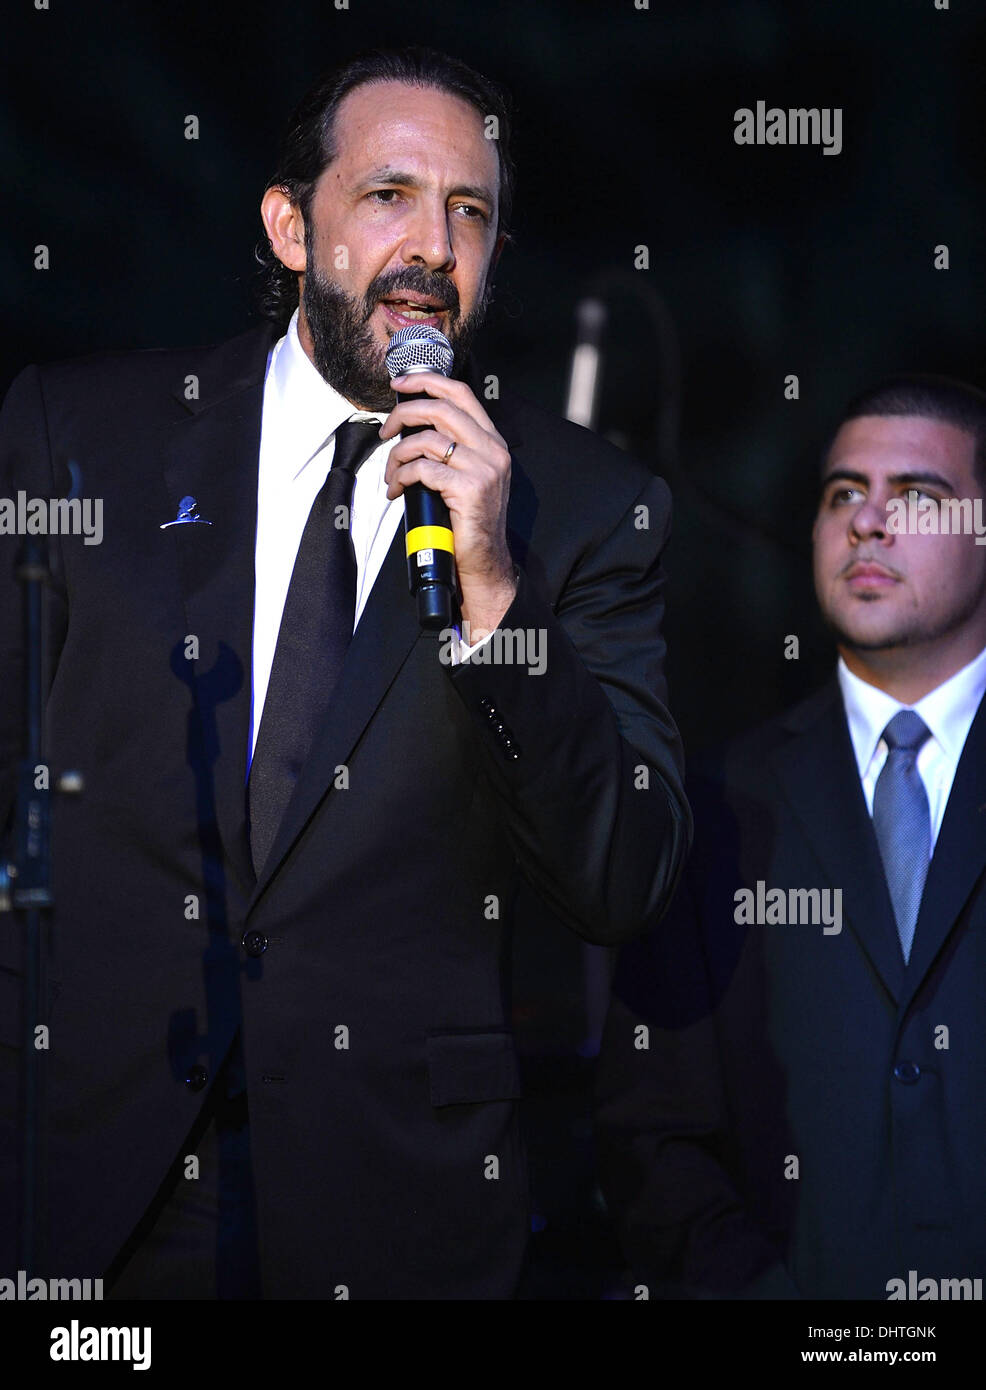 Juan Luis Guerra The St. Jude Angels and Stars Gala at the JW Marriott hotel - Show Miami, Florida - 19.05.12 Stock Photo